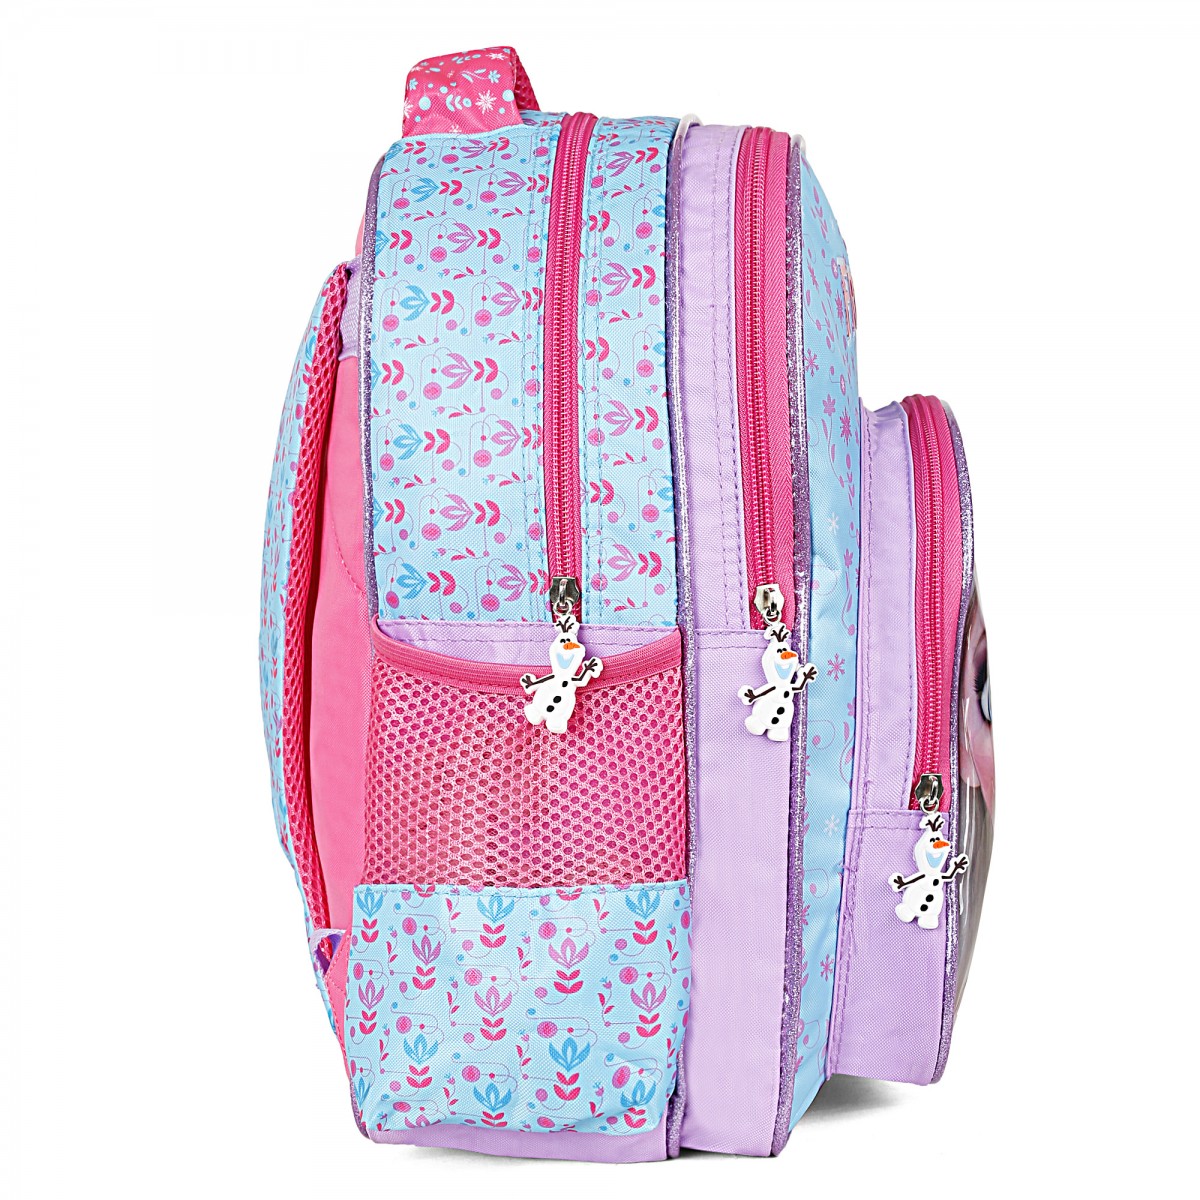 Striders Frozen Sisters School Bags, Cartoon Character Backpack best for Girls, Kids for 5Y+, Multicolour